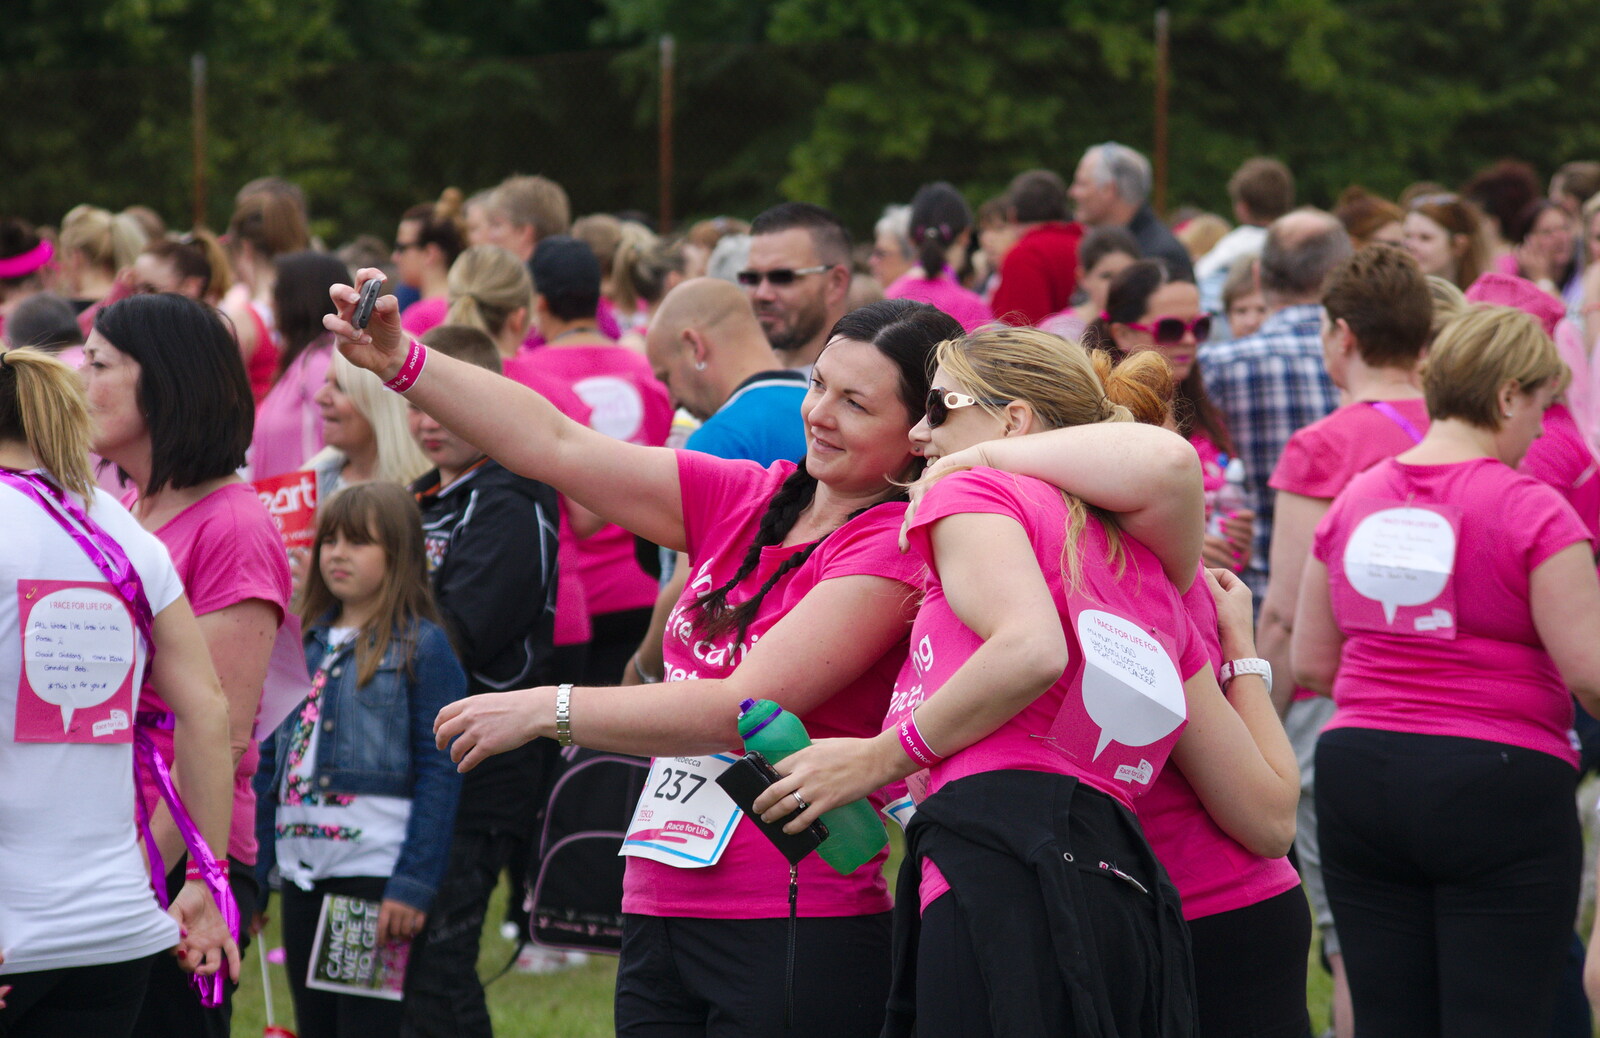 A selfie occurs from Isobel's Race For Life, Chantry Park, Ipswich - 11th June 2014